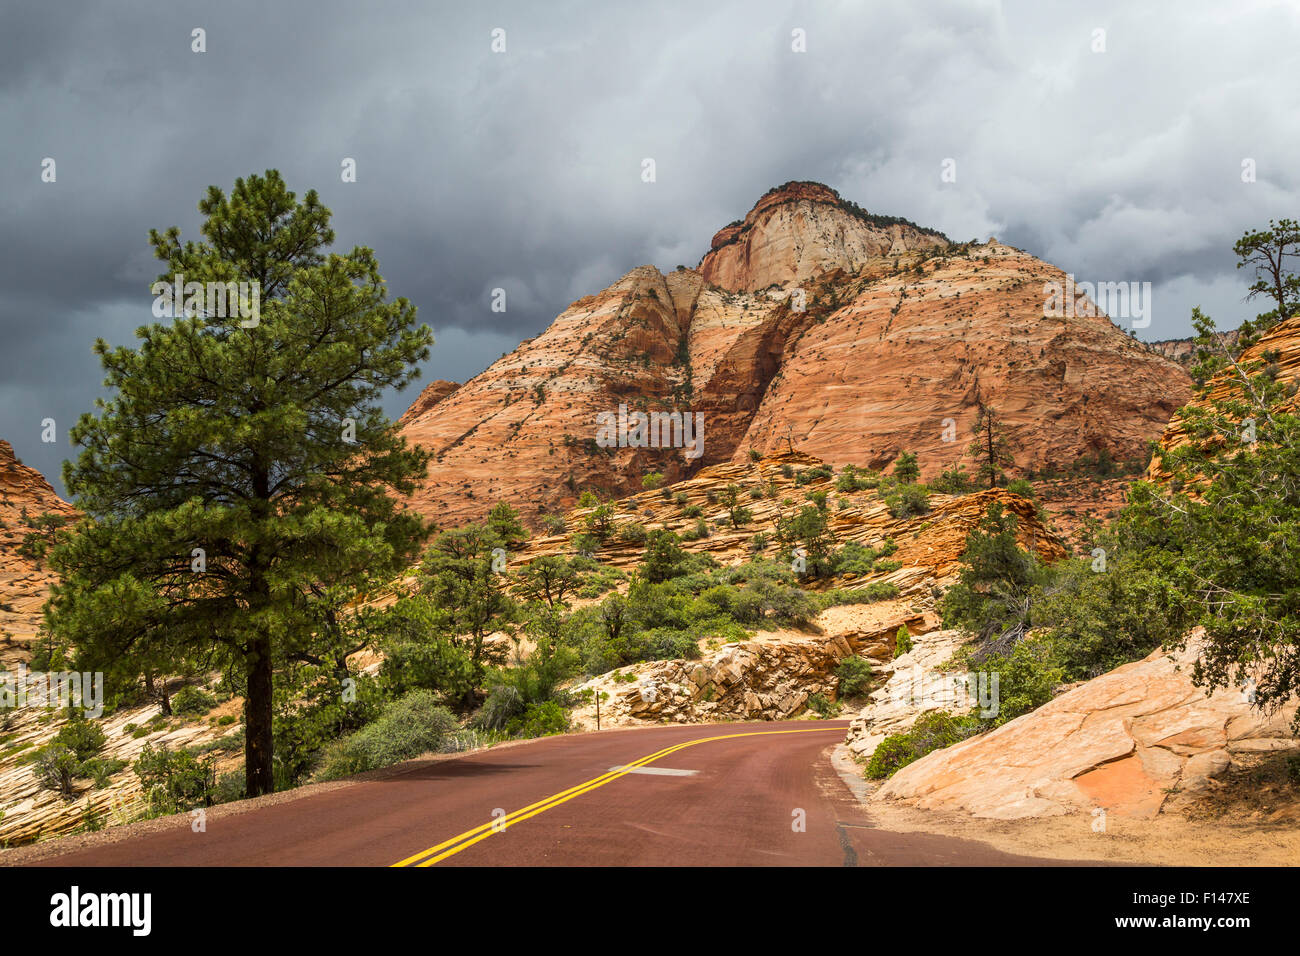 The rock formations, mountains, buttes and valleys of Zion National Park, Utah, USA Stock Photo